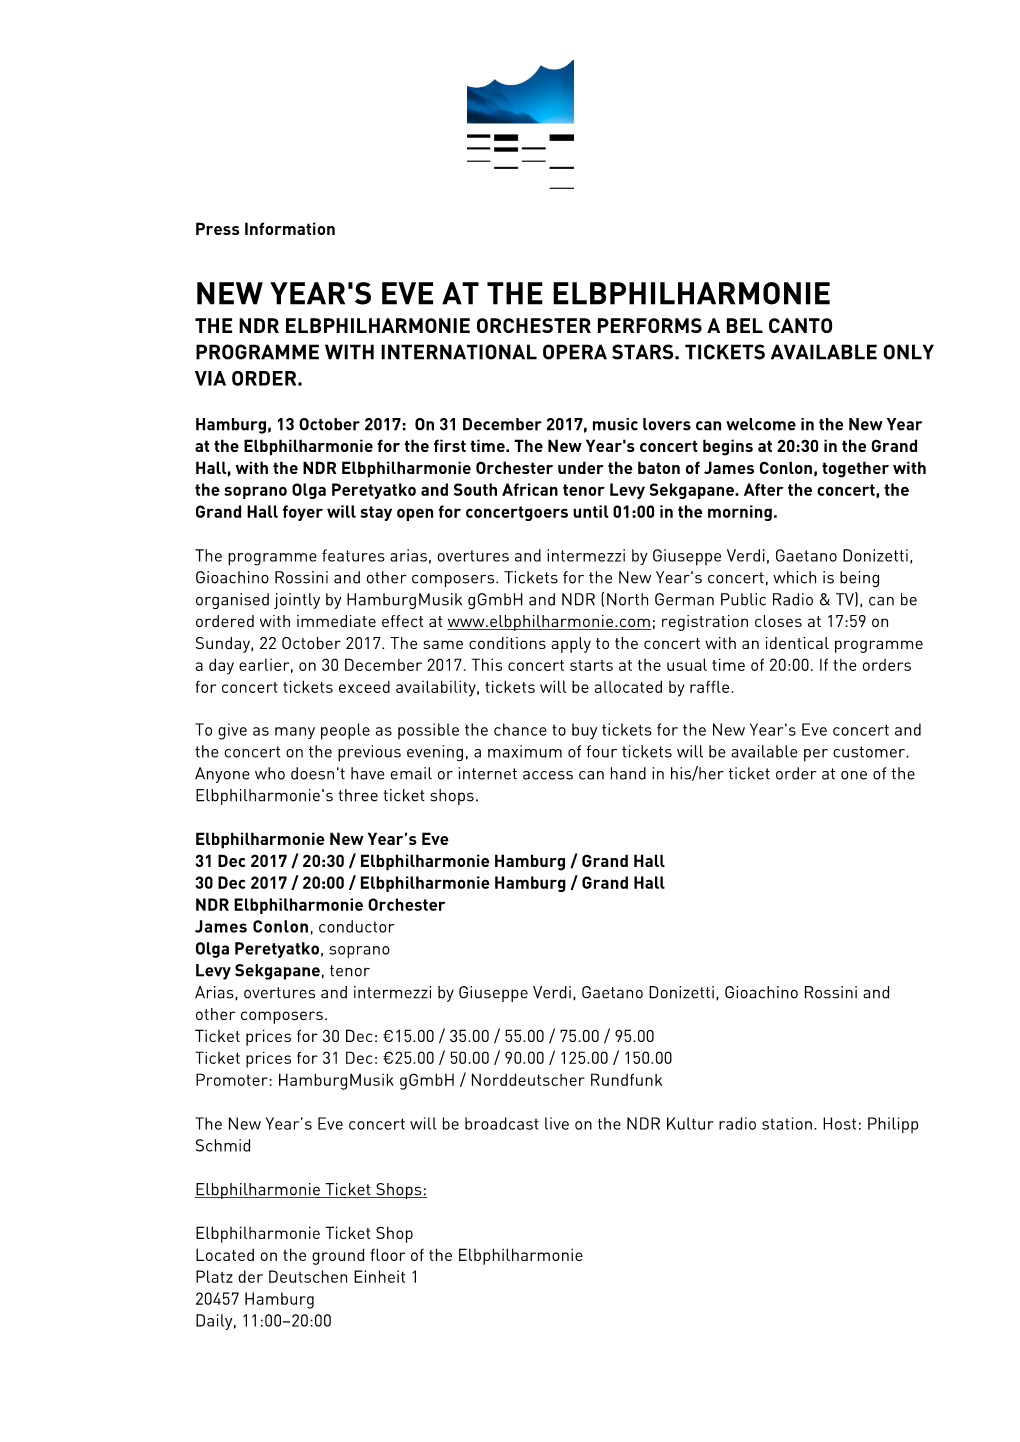 New Year's Eve at the Elbphilharmonie the Ndr Elbphilharmonie Orchester Performs a Bel Canto Programme with International Opera Stars